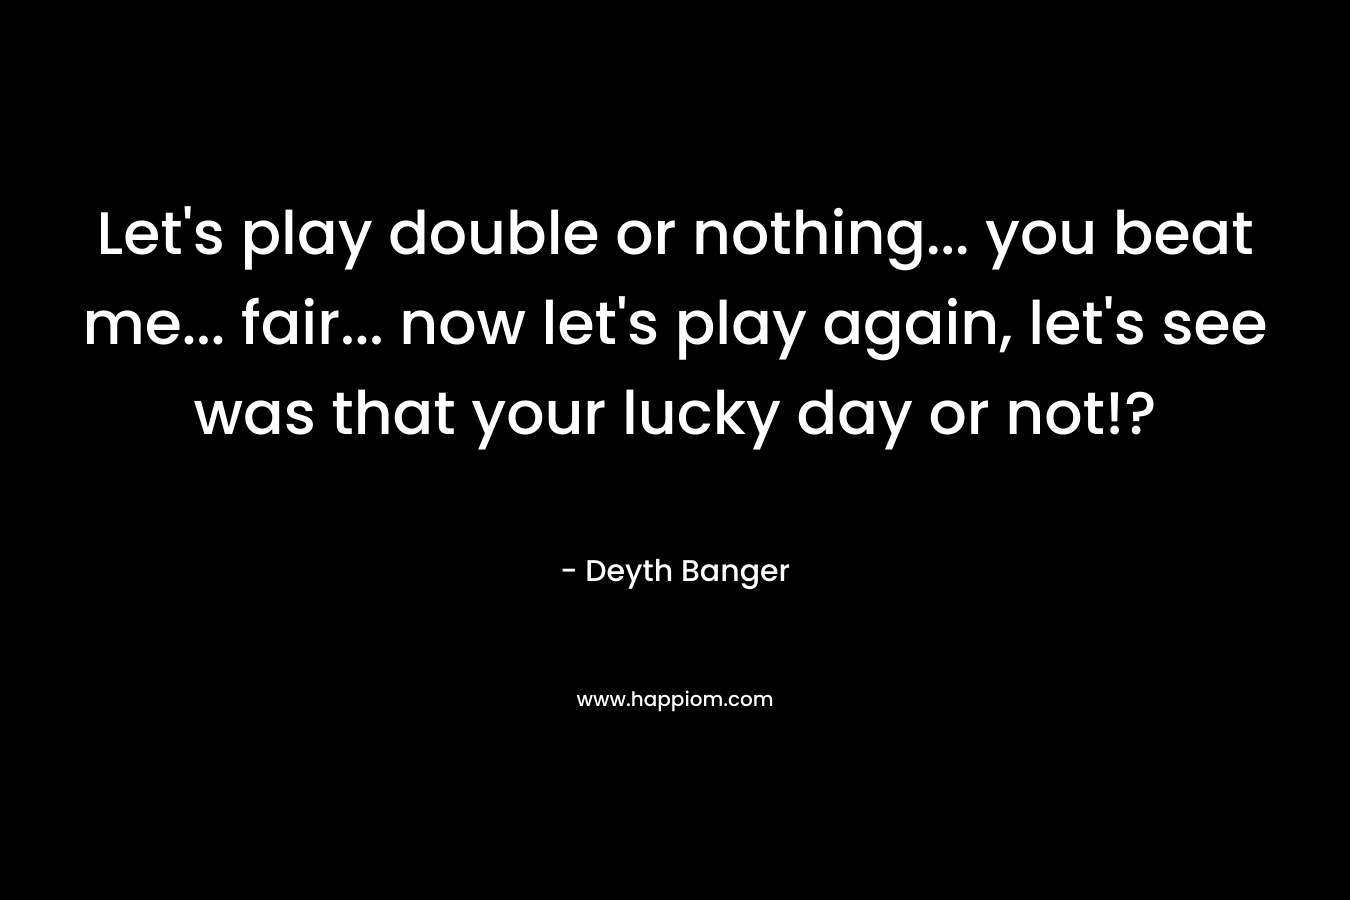 Let’s play double or nothing… you beat me… fair… now let’s play again, let’s see was that your lucky day or not!? – Deyth Banger